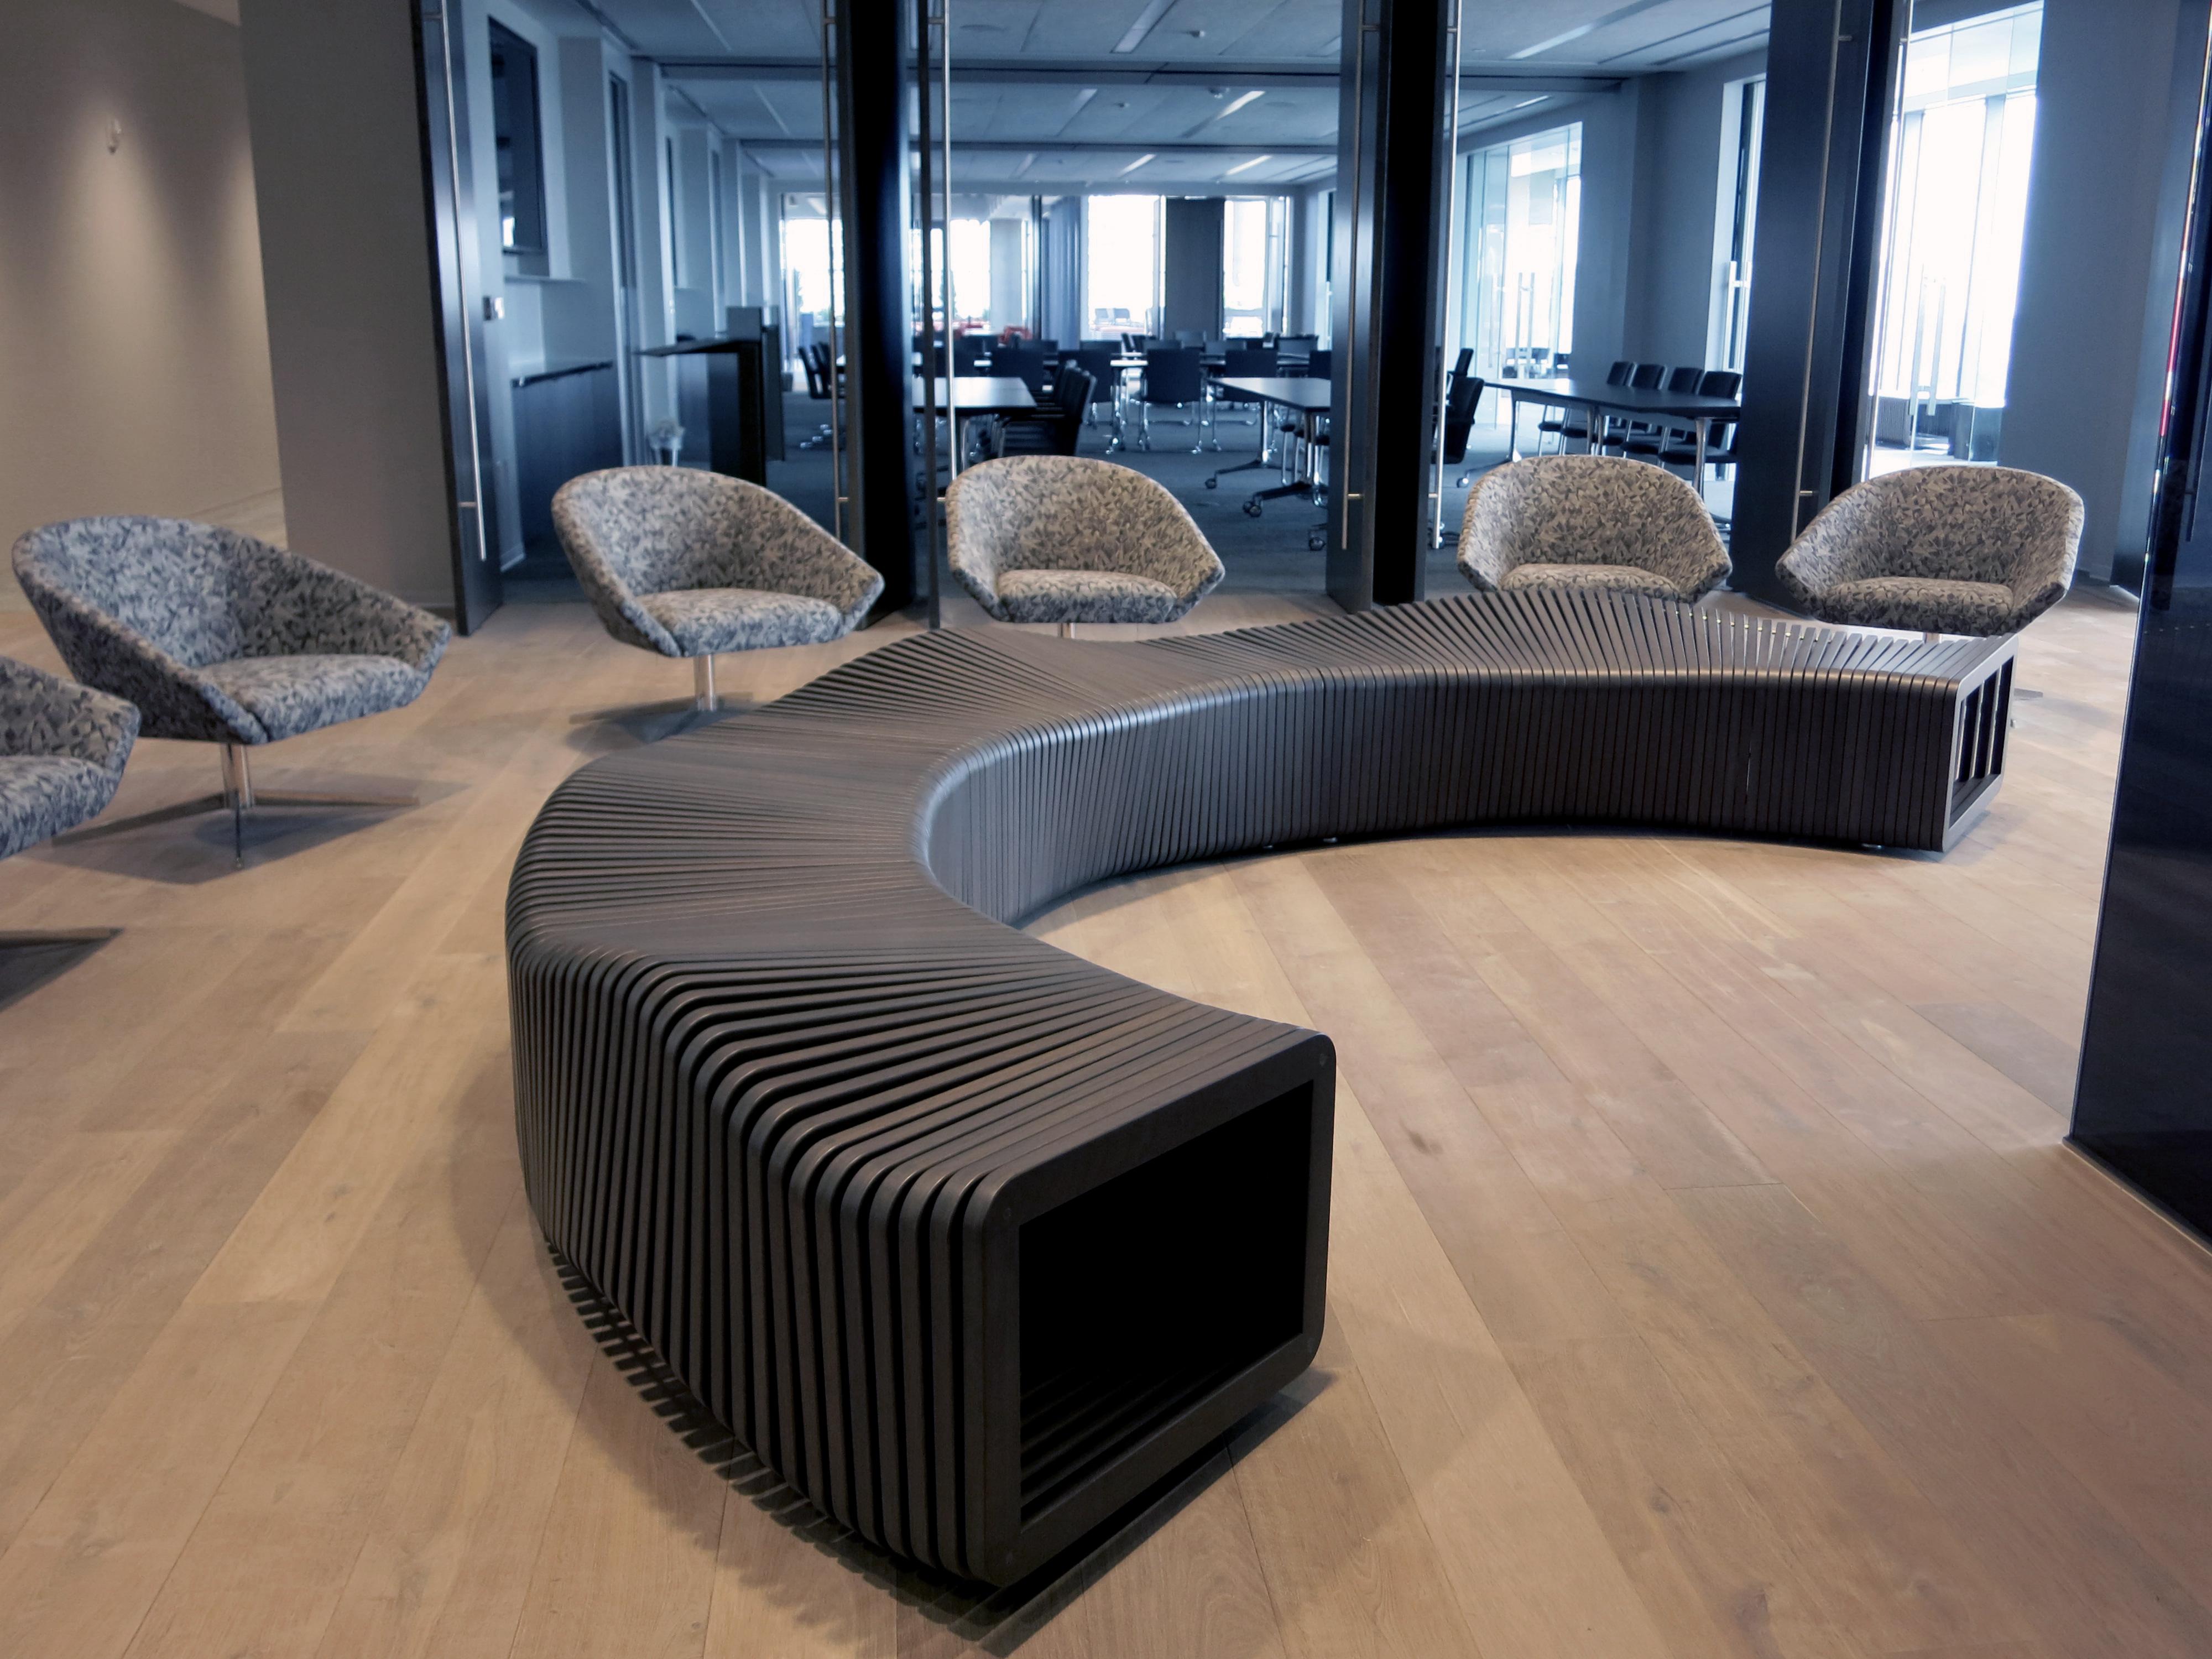 Rectangular frames and held together with fasteners and brass spacers to create an undulating serpentine bench. One half circle is created by five separate pieces allowing for various configurations. 

Available in most domestic woods. Custom